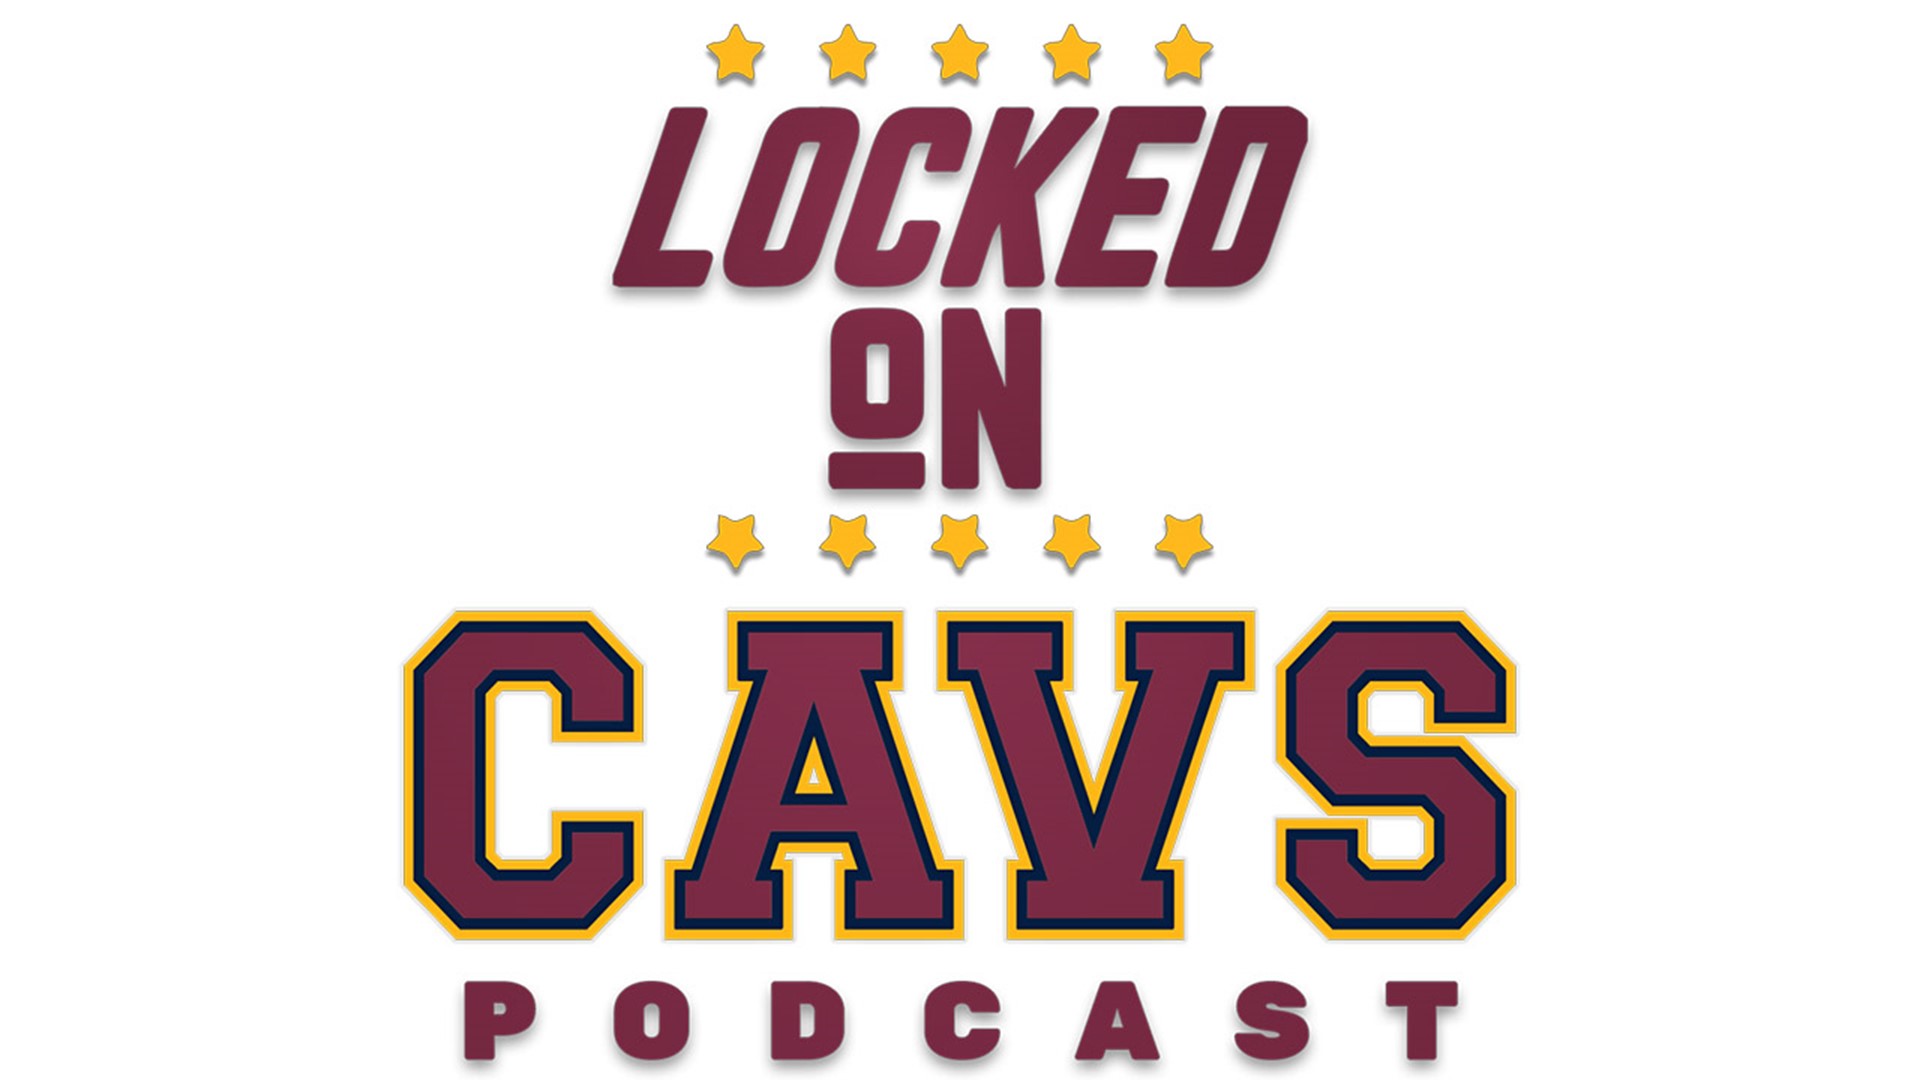 Mac Robinson of 92.3 The Fan joins the show to discuss Collin Sexton's injury and what it means for the Cavs.